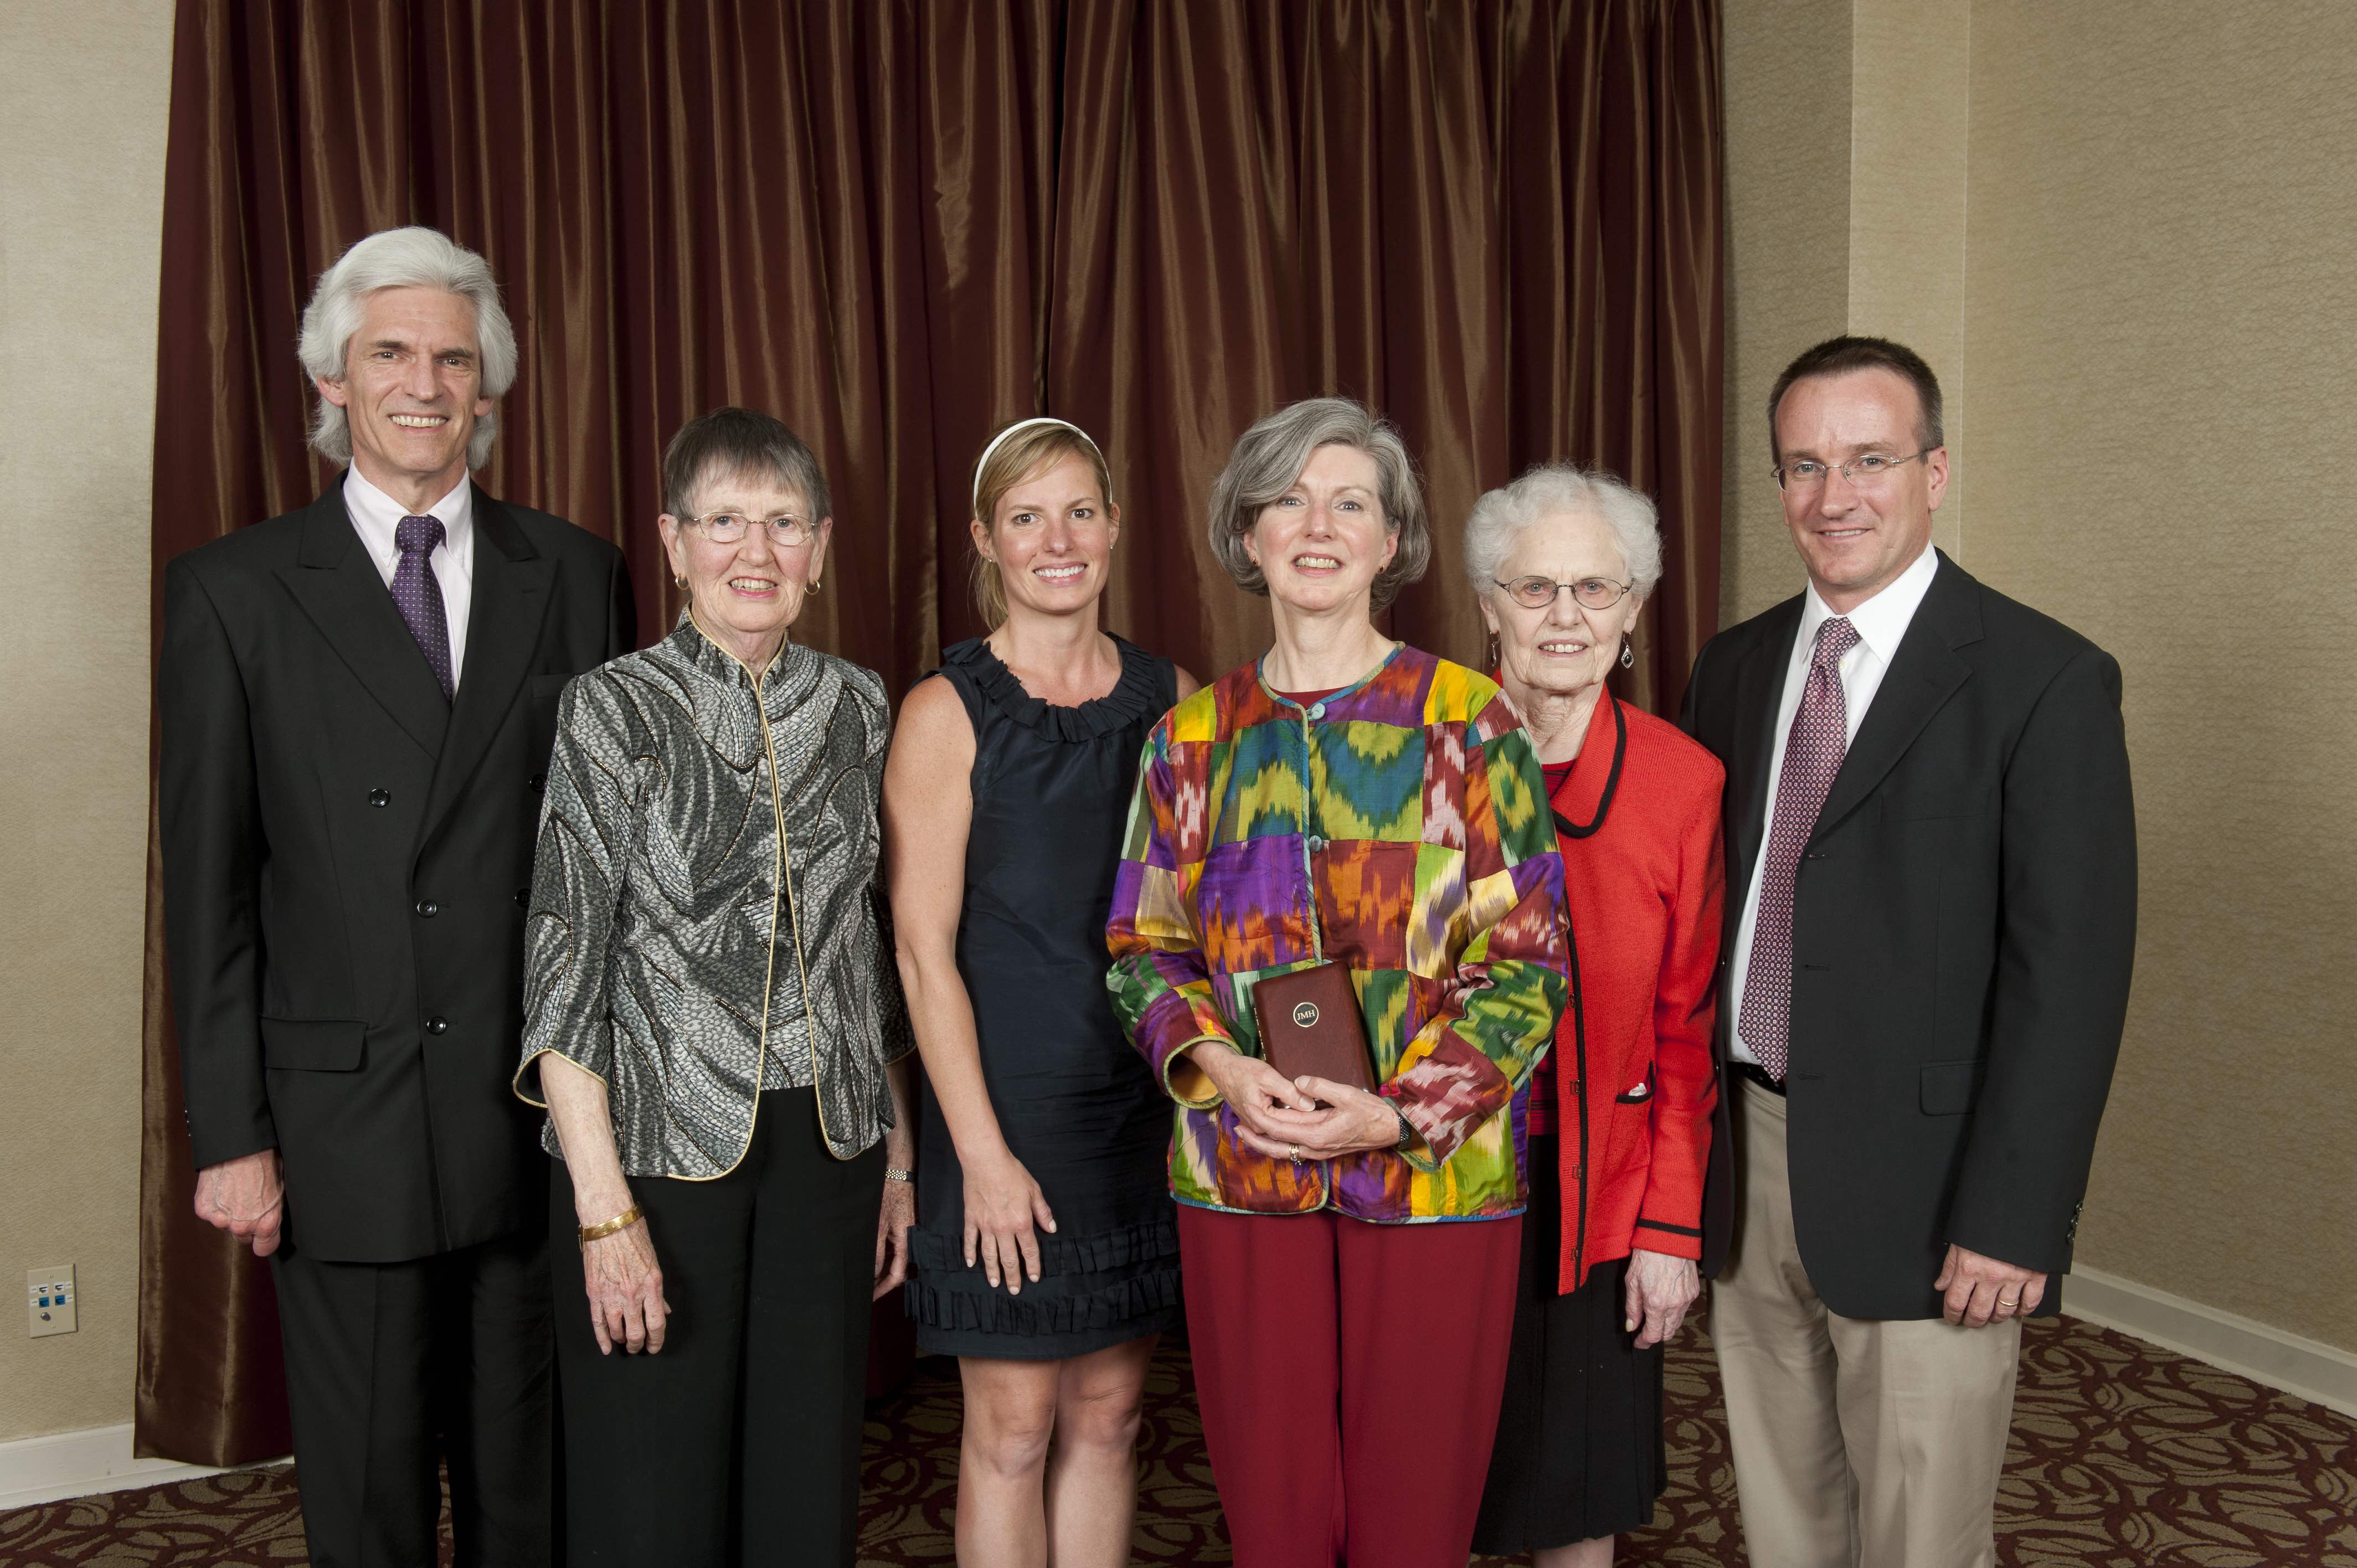 Jeanne Hogarth and family together during alumni awards ceremony